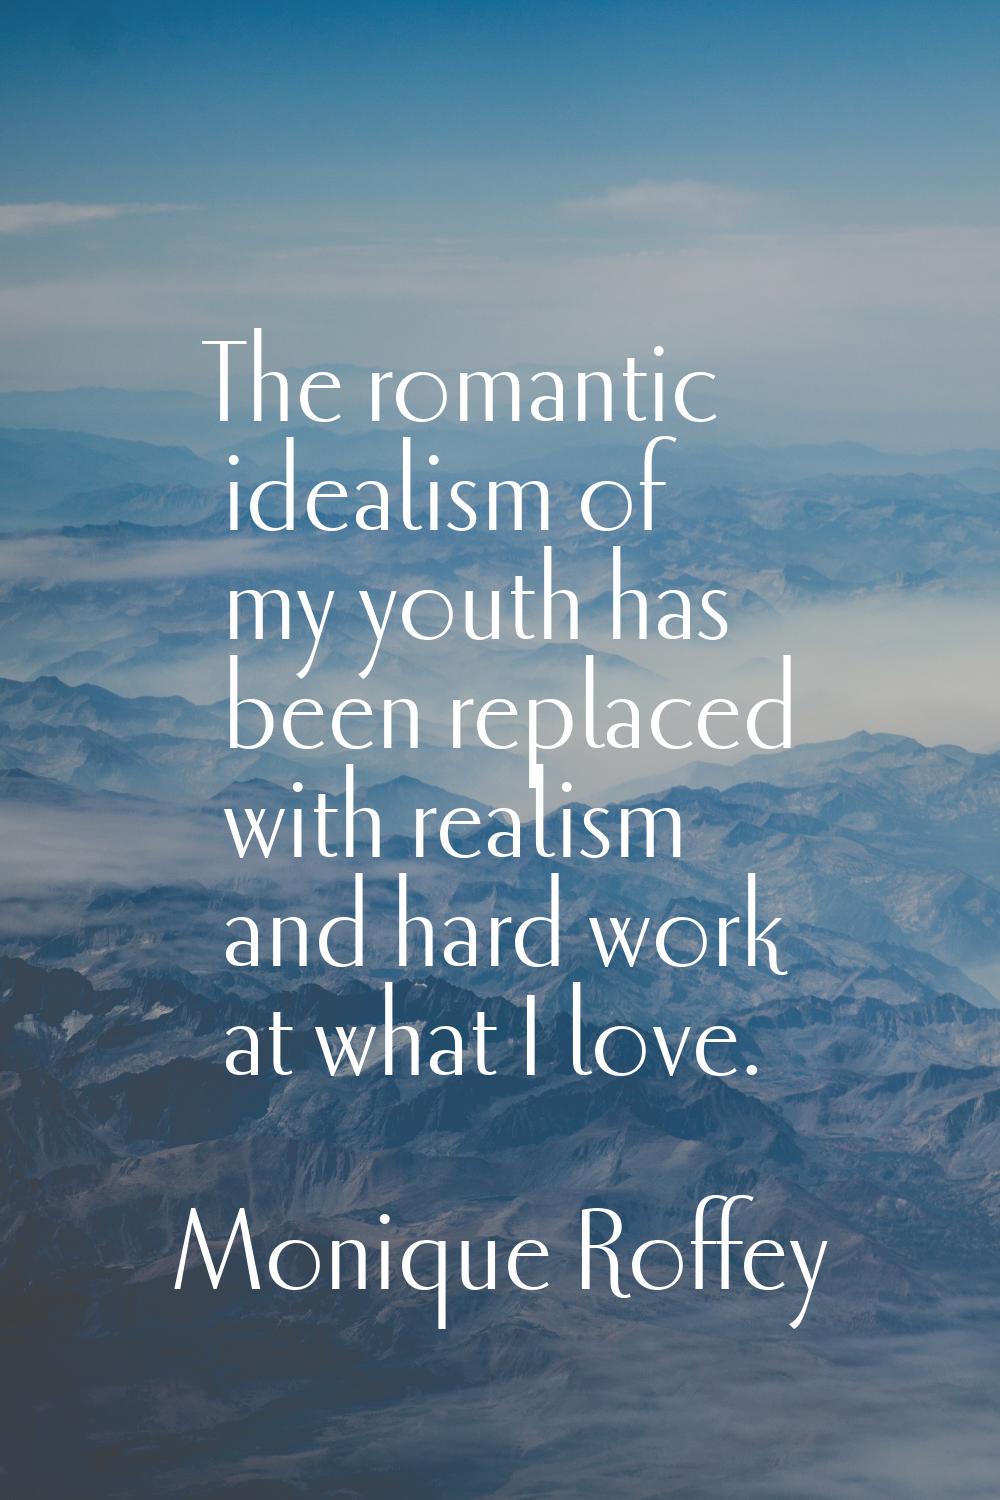 The romantic idealism of my youth has been replaced with realism and hard work at what I love.